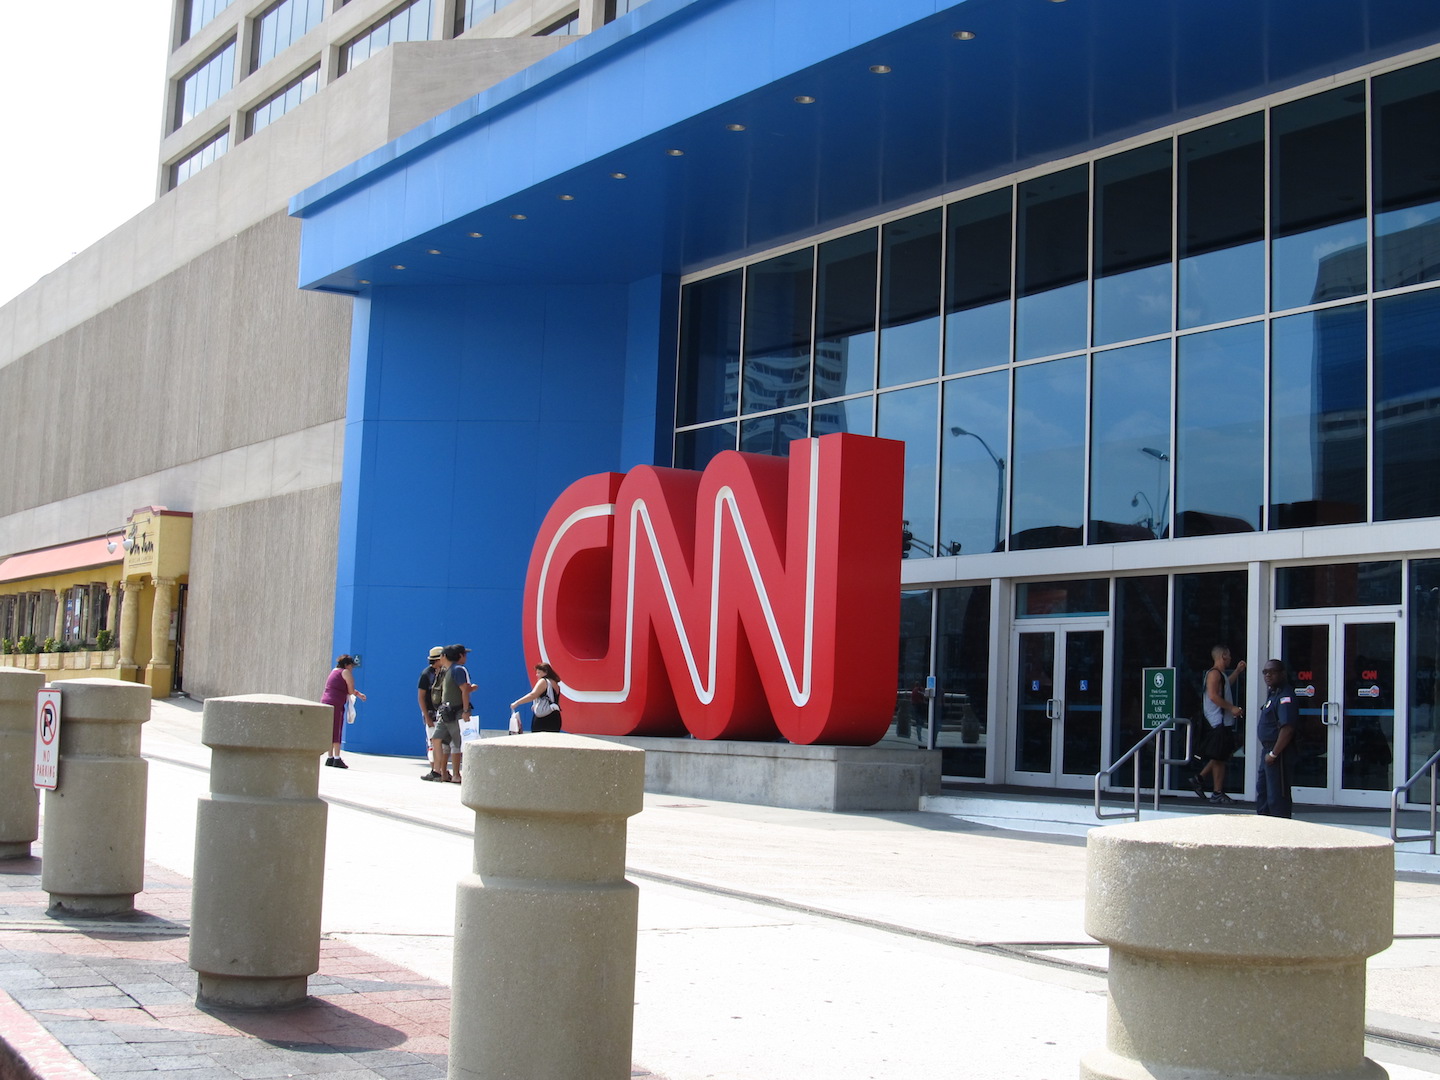 CNN’s outrageous, defamatory LIES against Jack Posobiec result in wave of death threats against his family … Retraction demanded